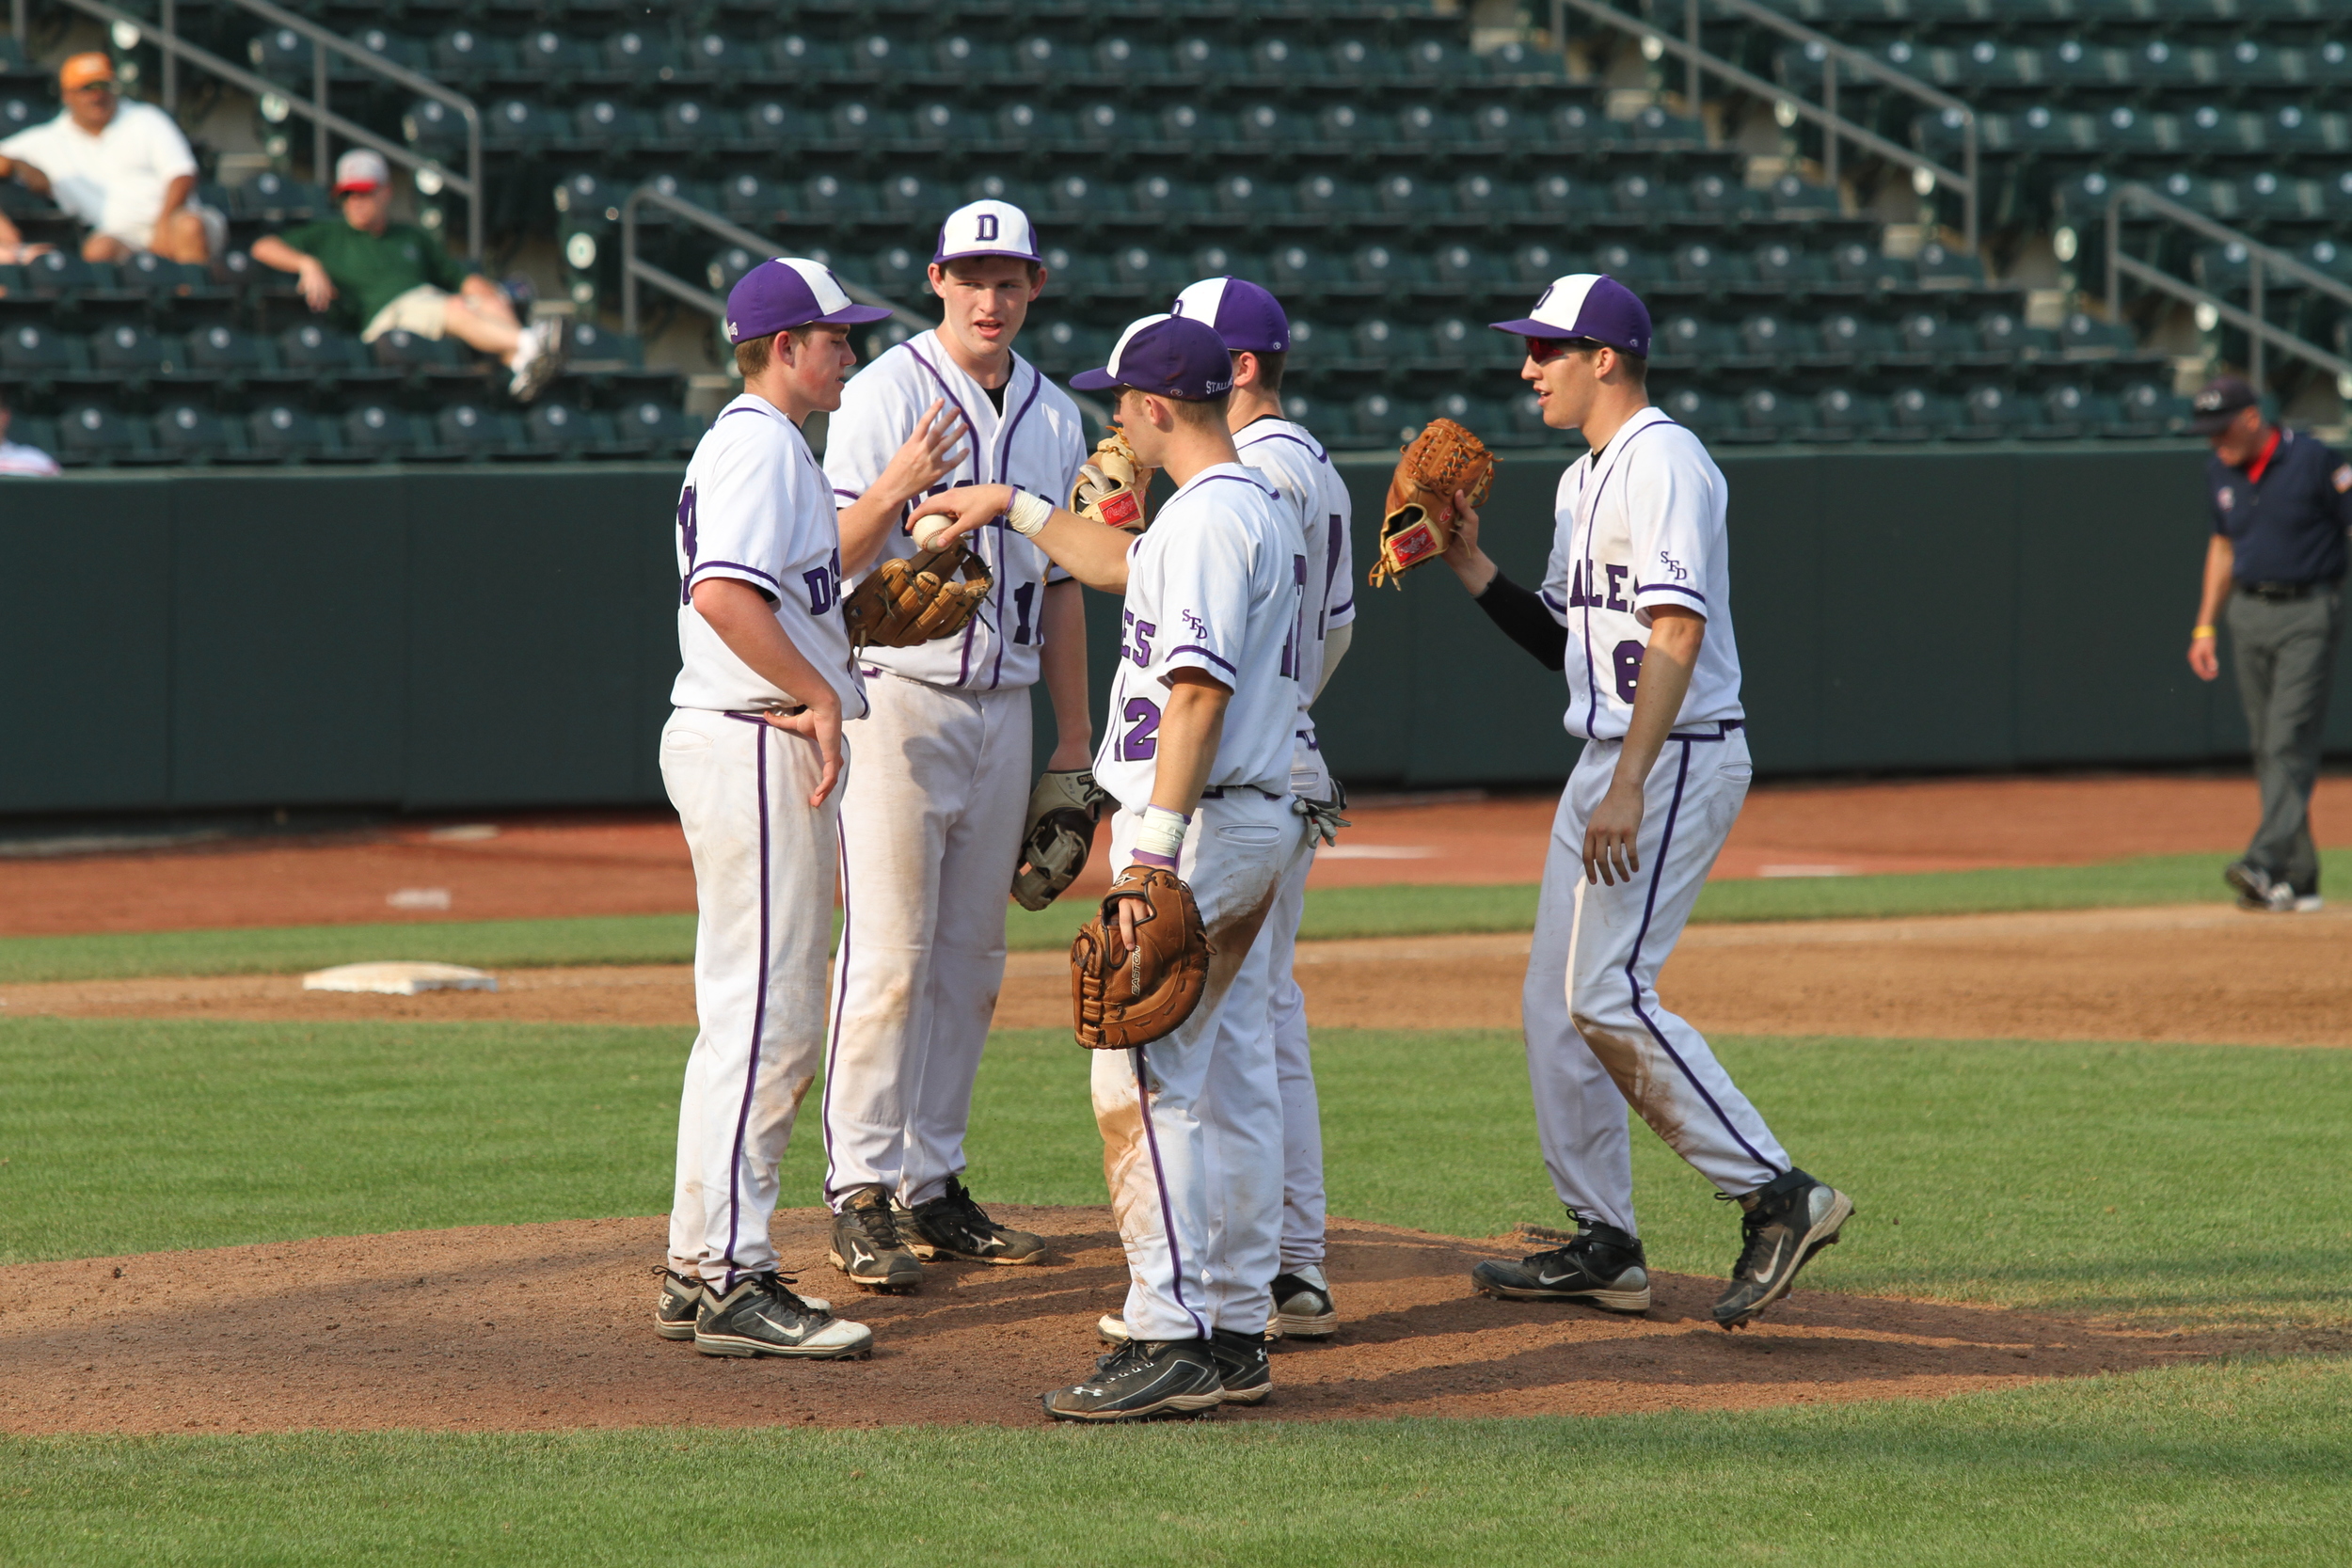 Player meeting at the mound in the title game